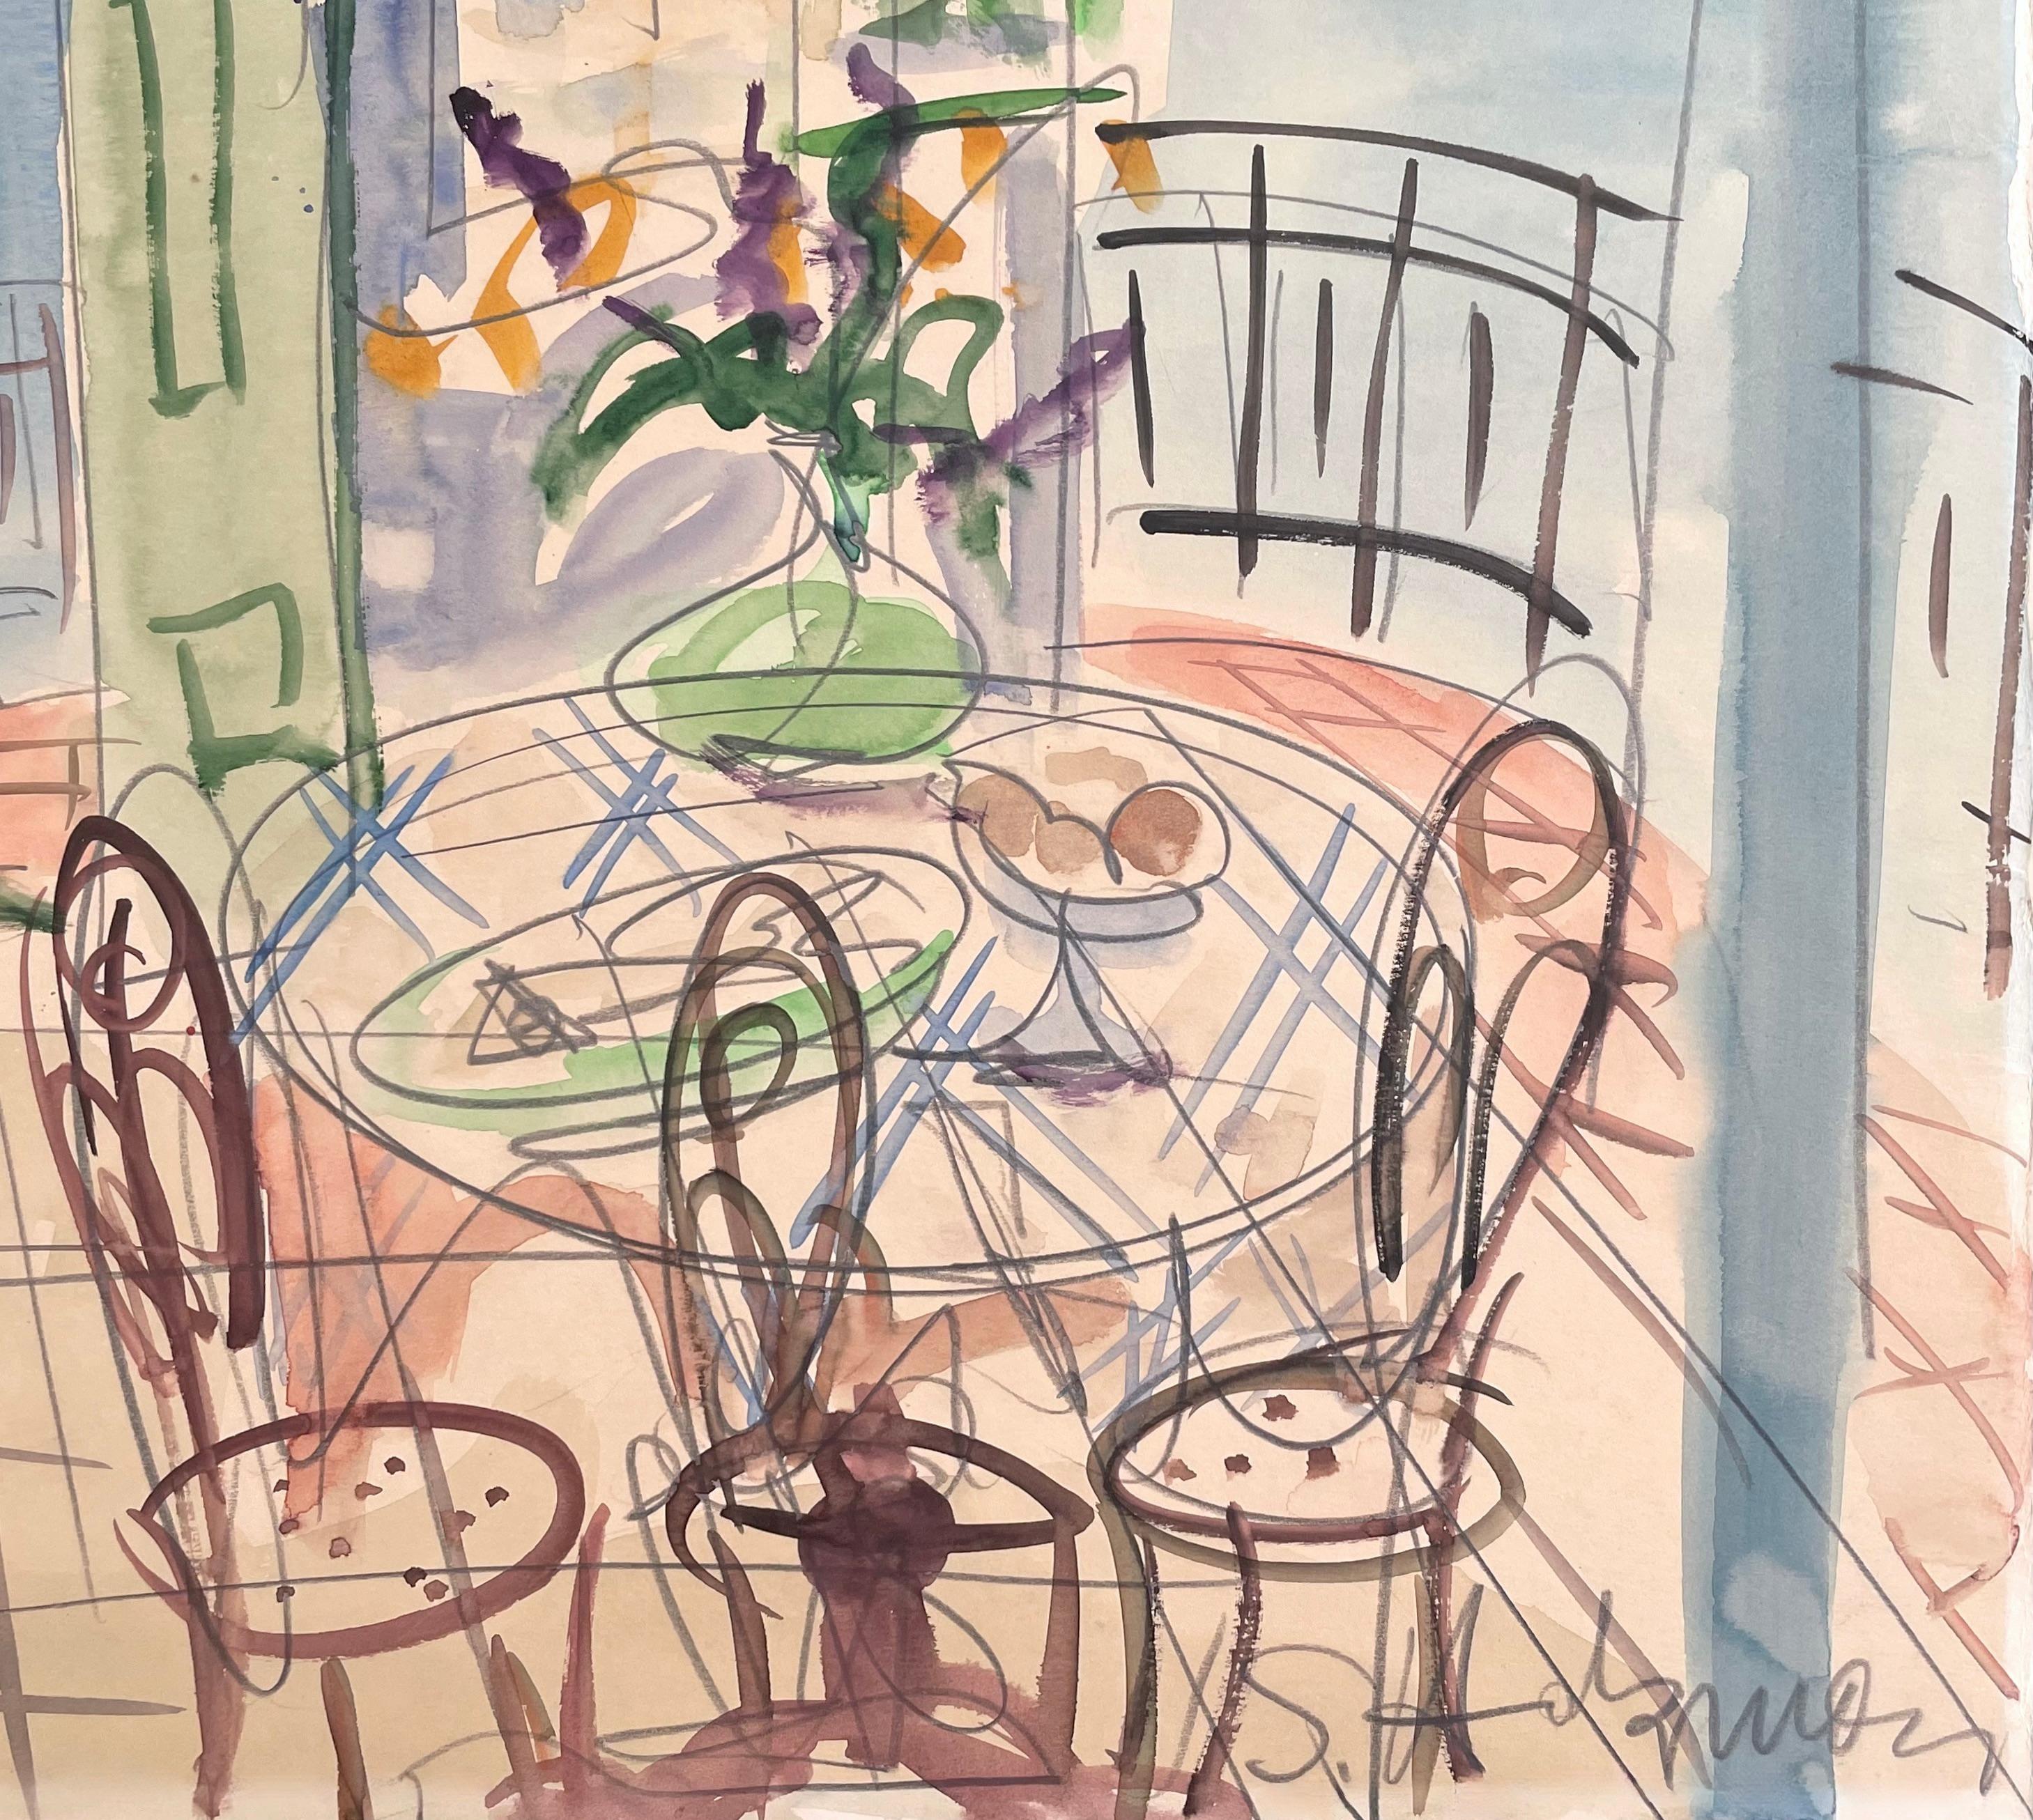 Artist: Shimshon Holzman (1907-1986)
Title: Untitled (Cafe Interior)
Year: 1962
Medium: Watercolor and graphite on wove paper
Size: 27.75 x 19.75 inches
Condition: Excellent
Inscription: Signed and dated by the artist

SHIMSHON HOLZMAN (1907–1986)